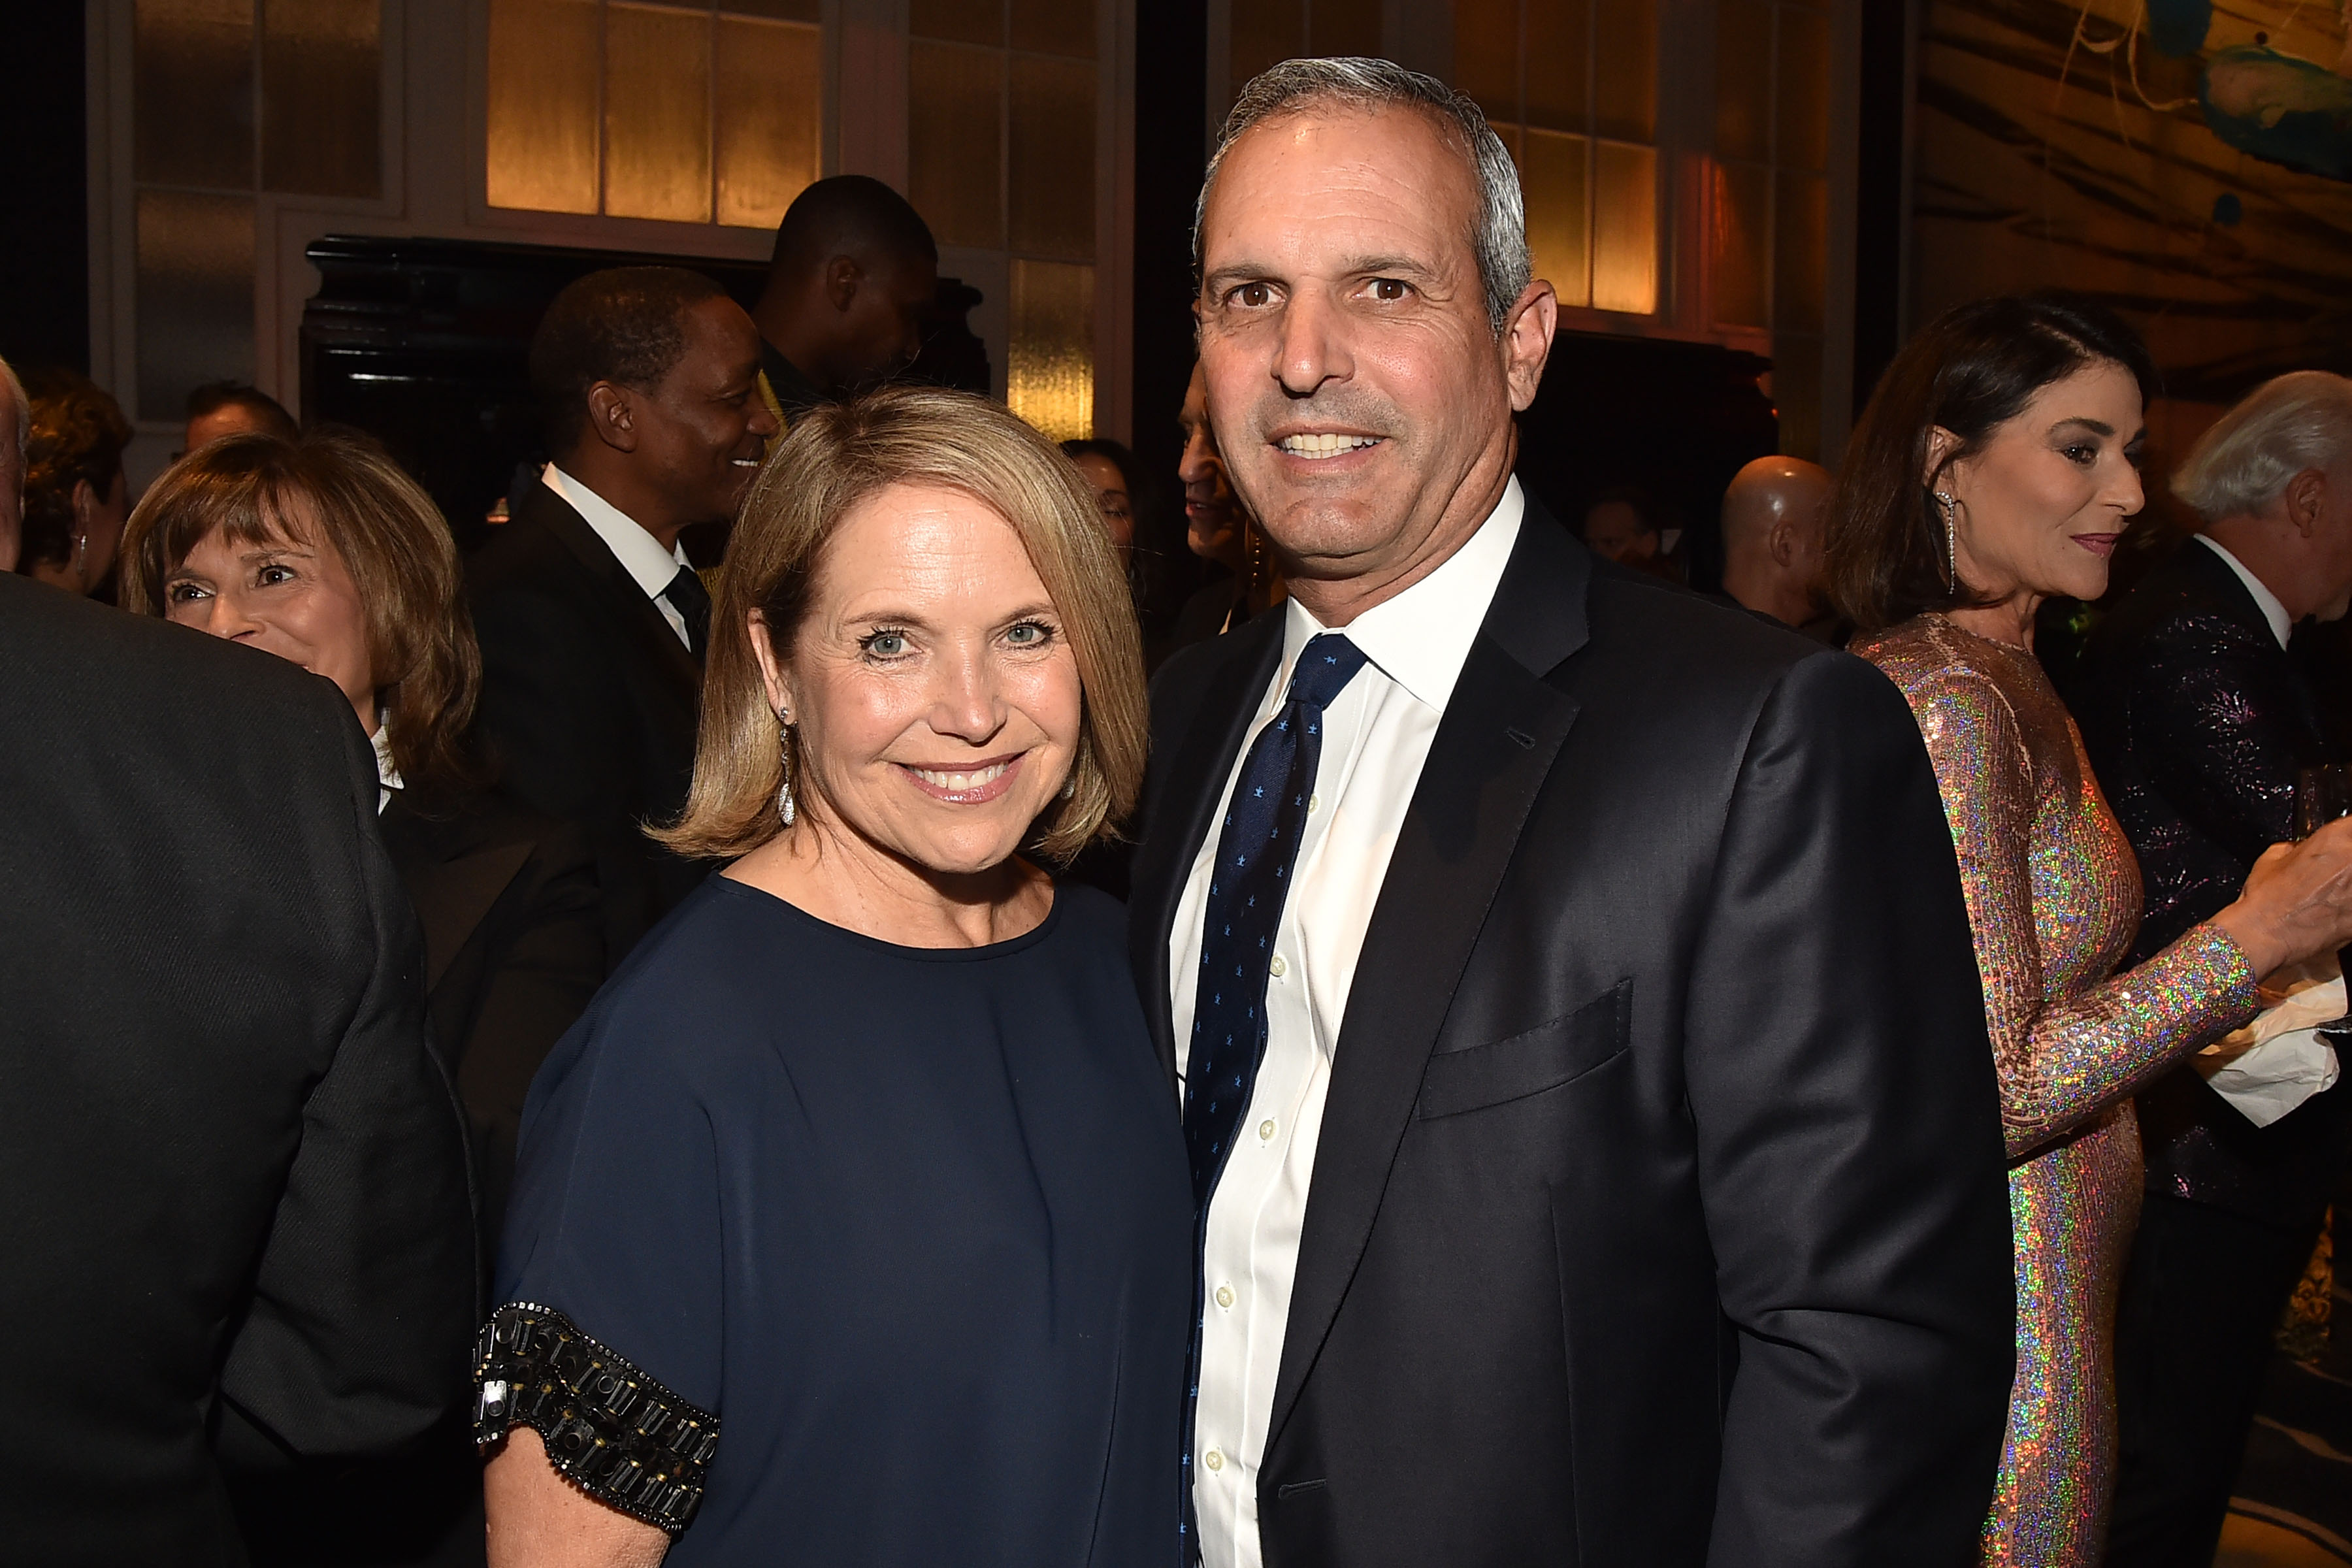 Katie Couric and John Molner attend Clive's Milestone Birthday Gala on April 6, 2022, at Cipriani South Street, in New York City. | Source: Getty Images